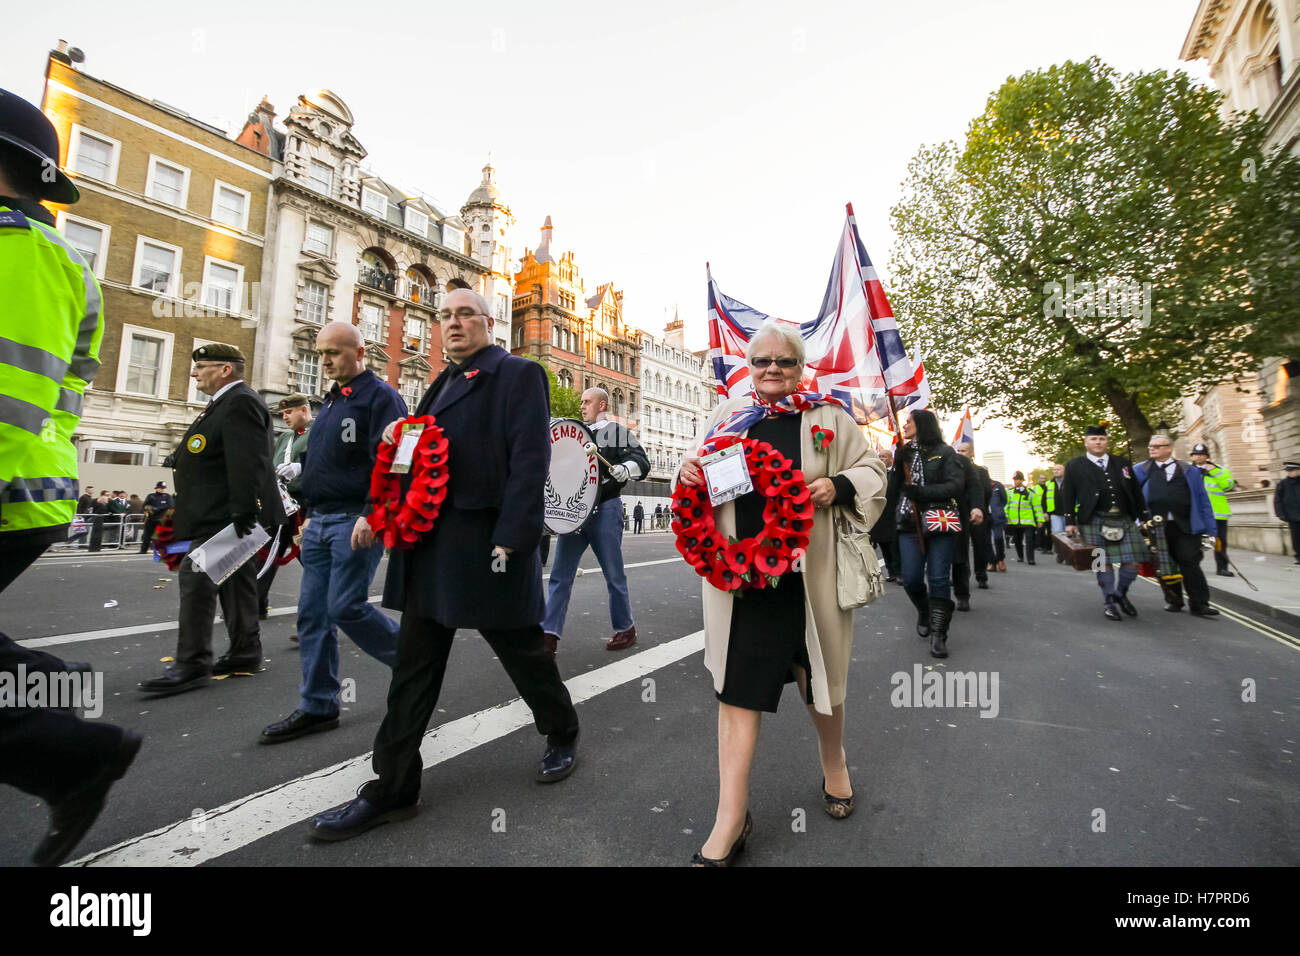 British far-right organisation: The National Front (NF) hold their annual Remembrance Day march through central London, UK. Stock Photo